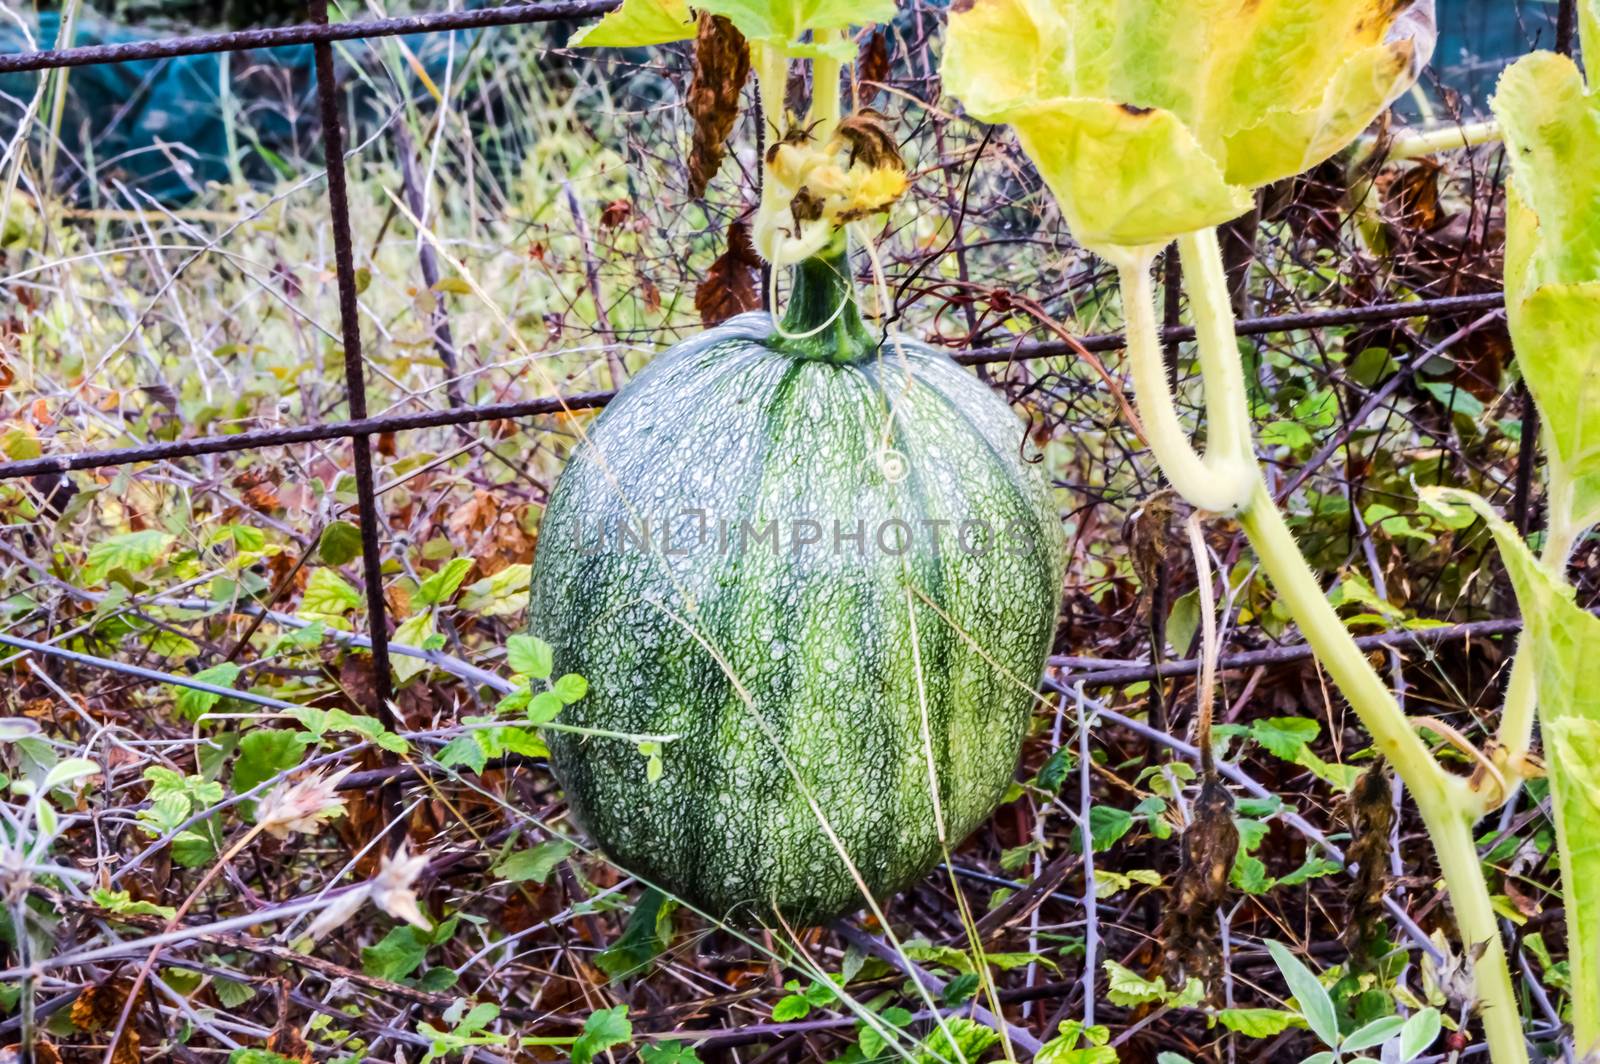 Watermelon in an orchard in front of a fence